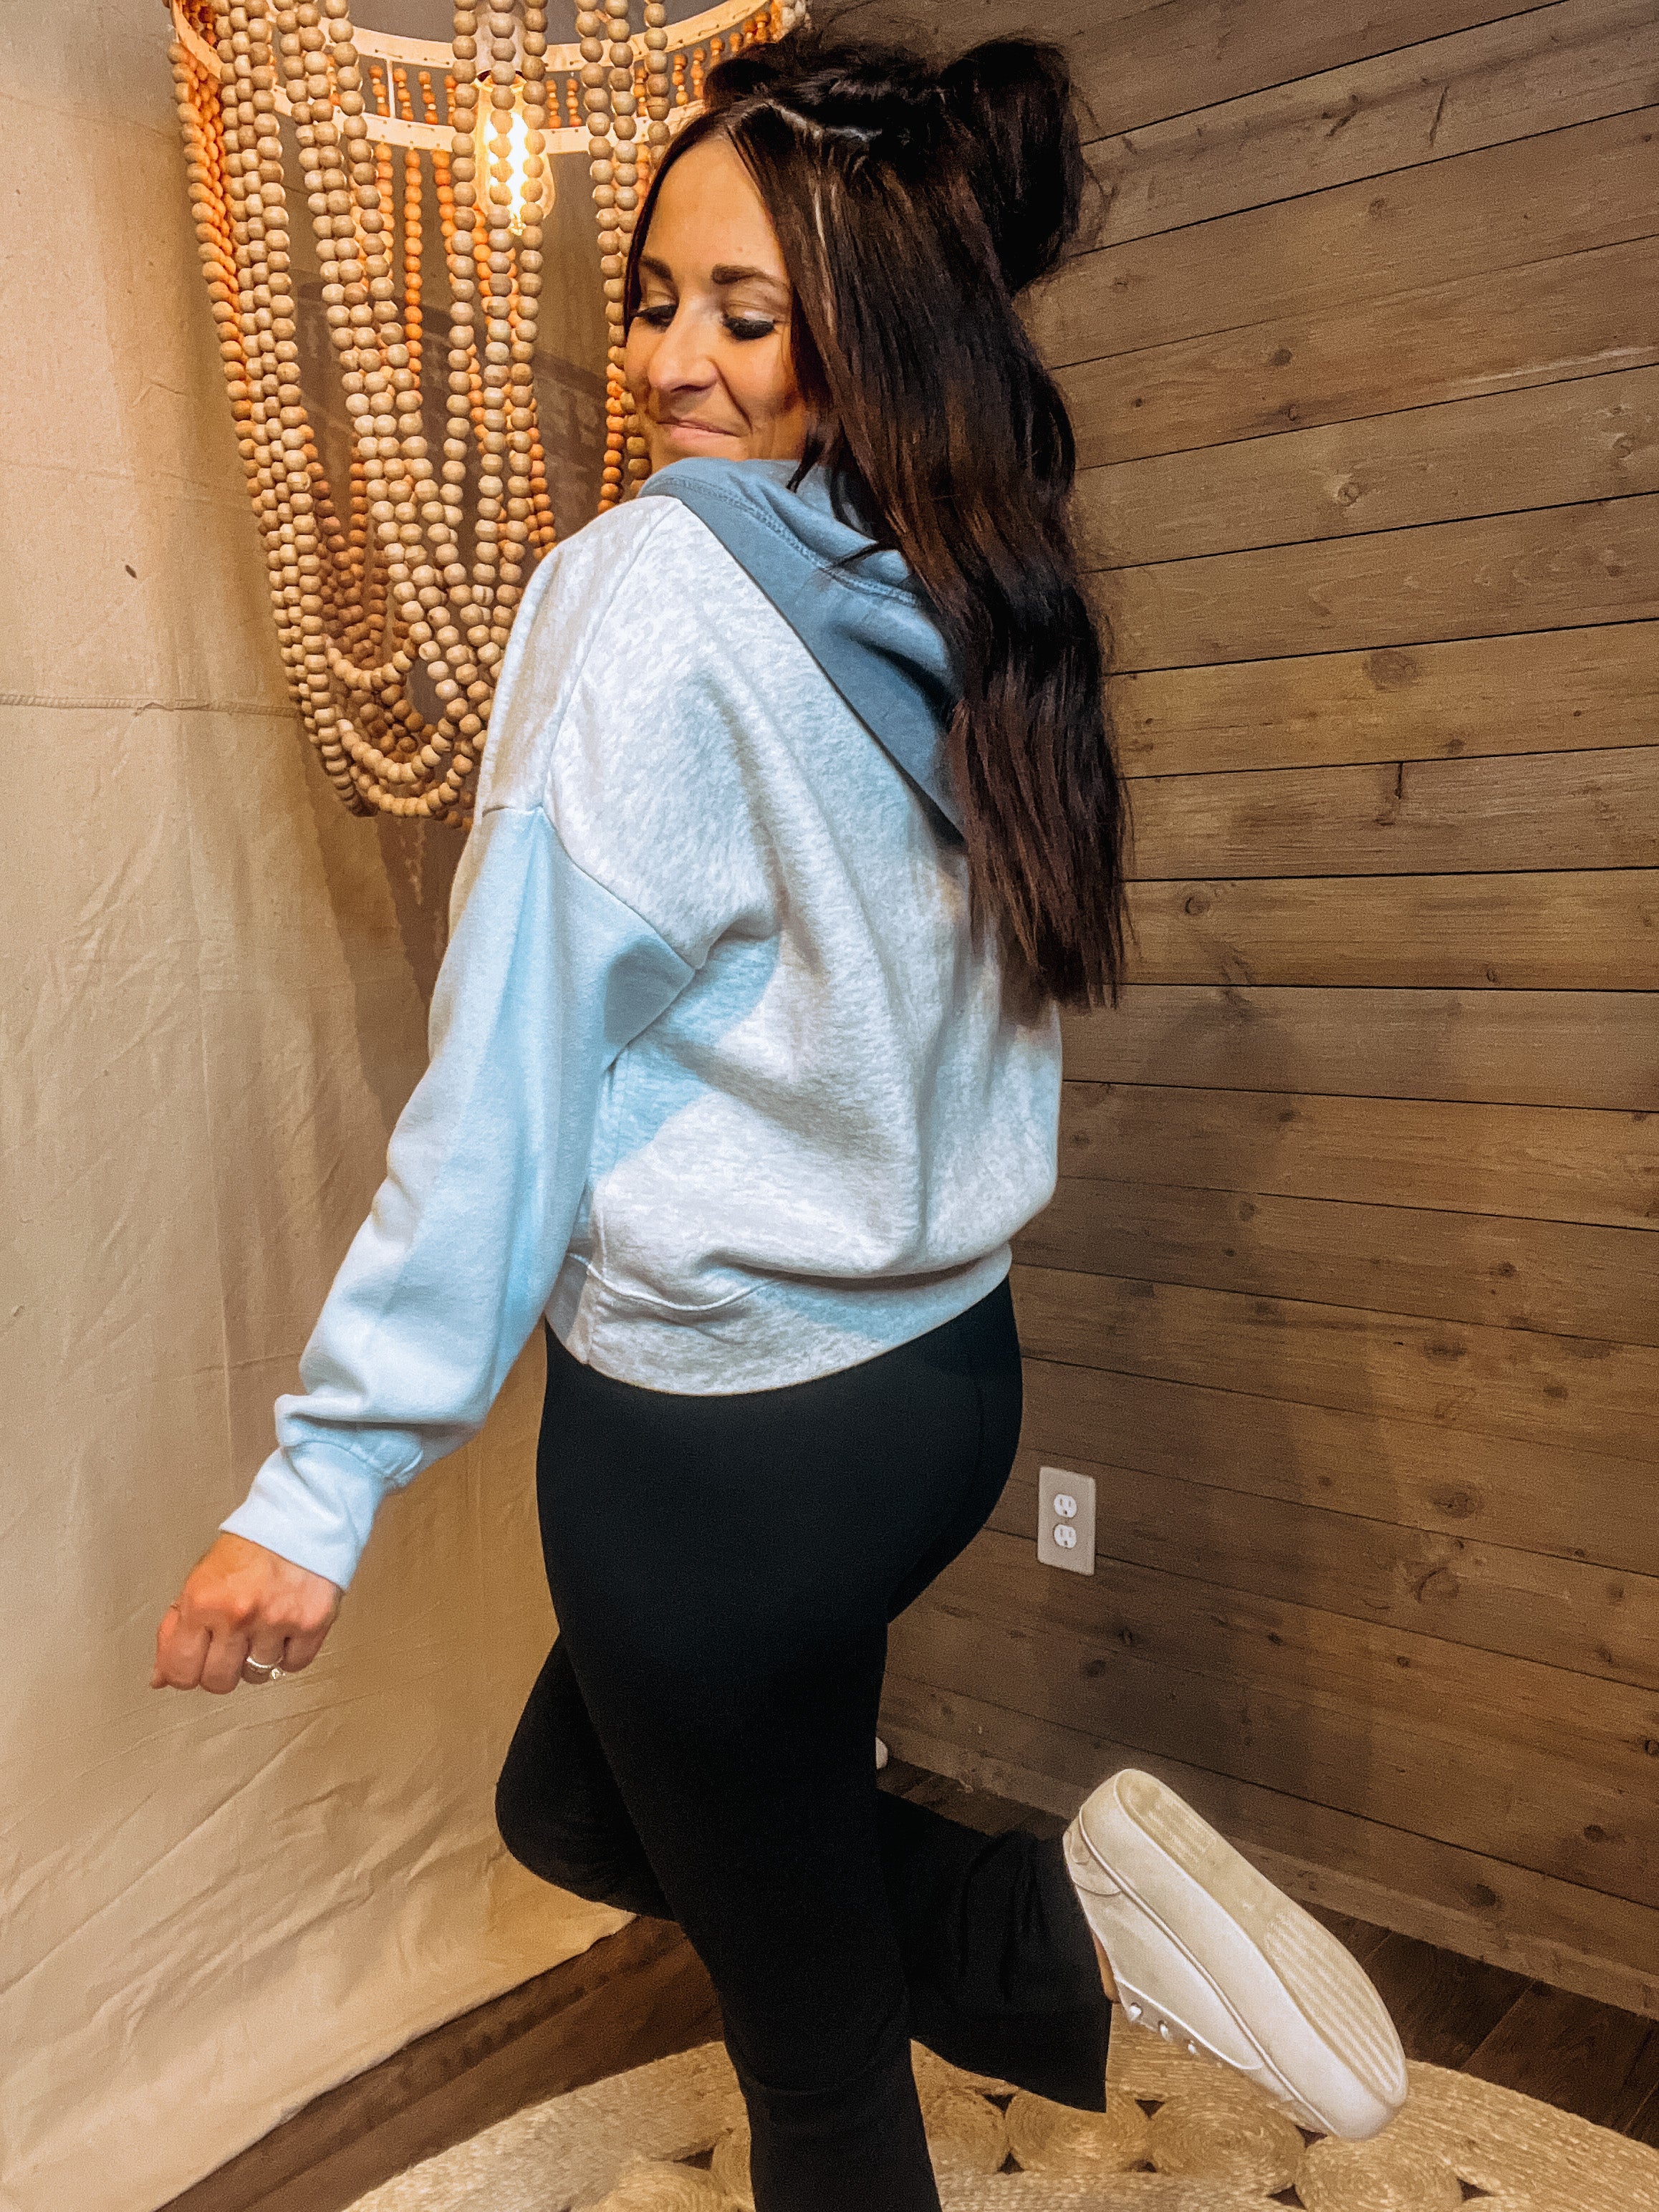 "Happy" Colorblocked Cropped Hoodie